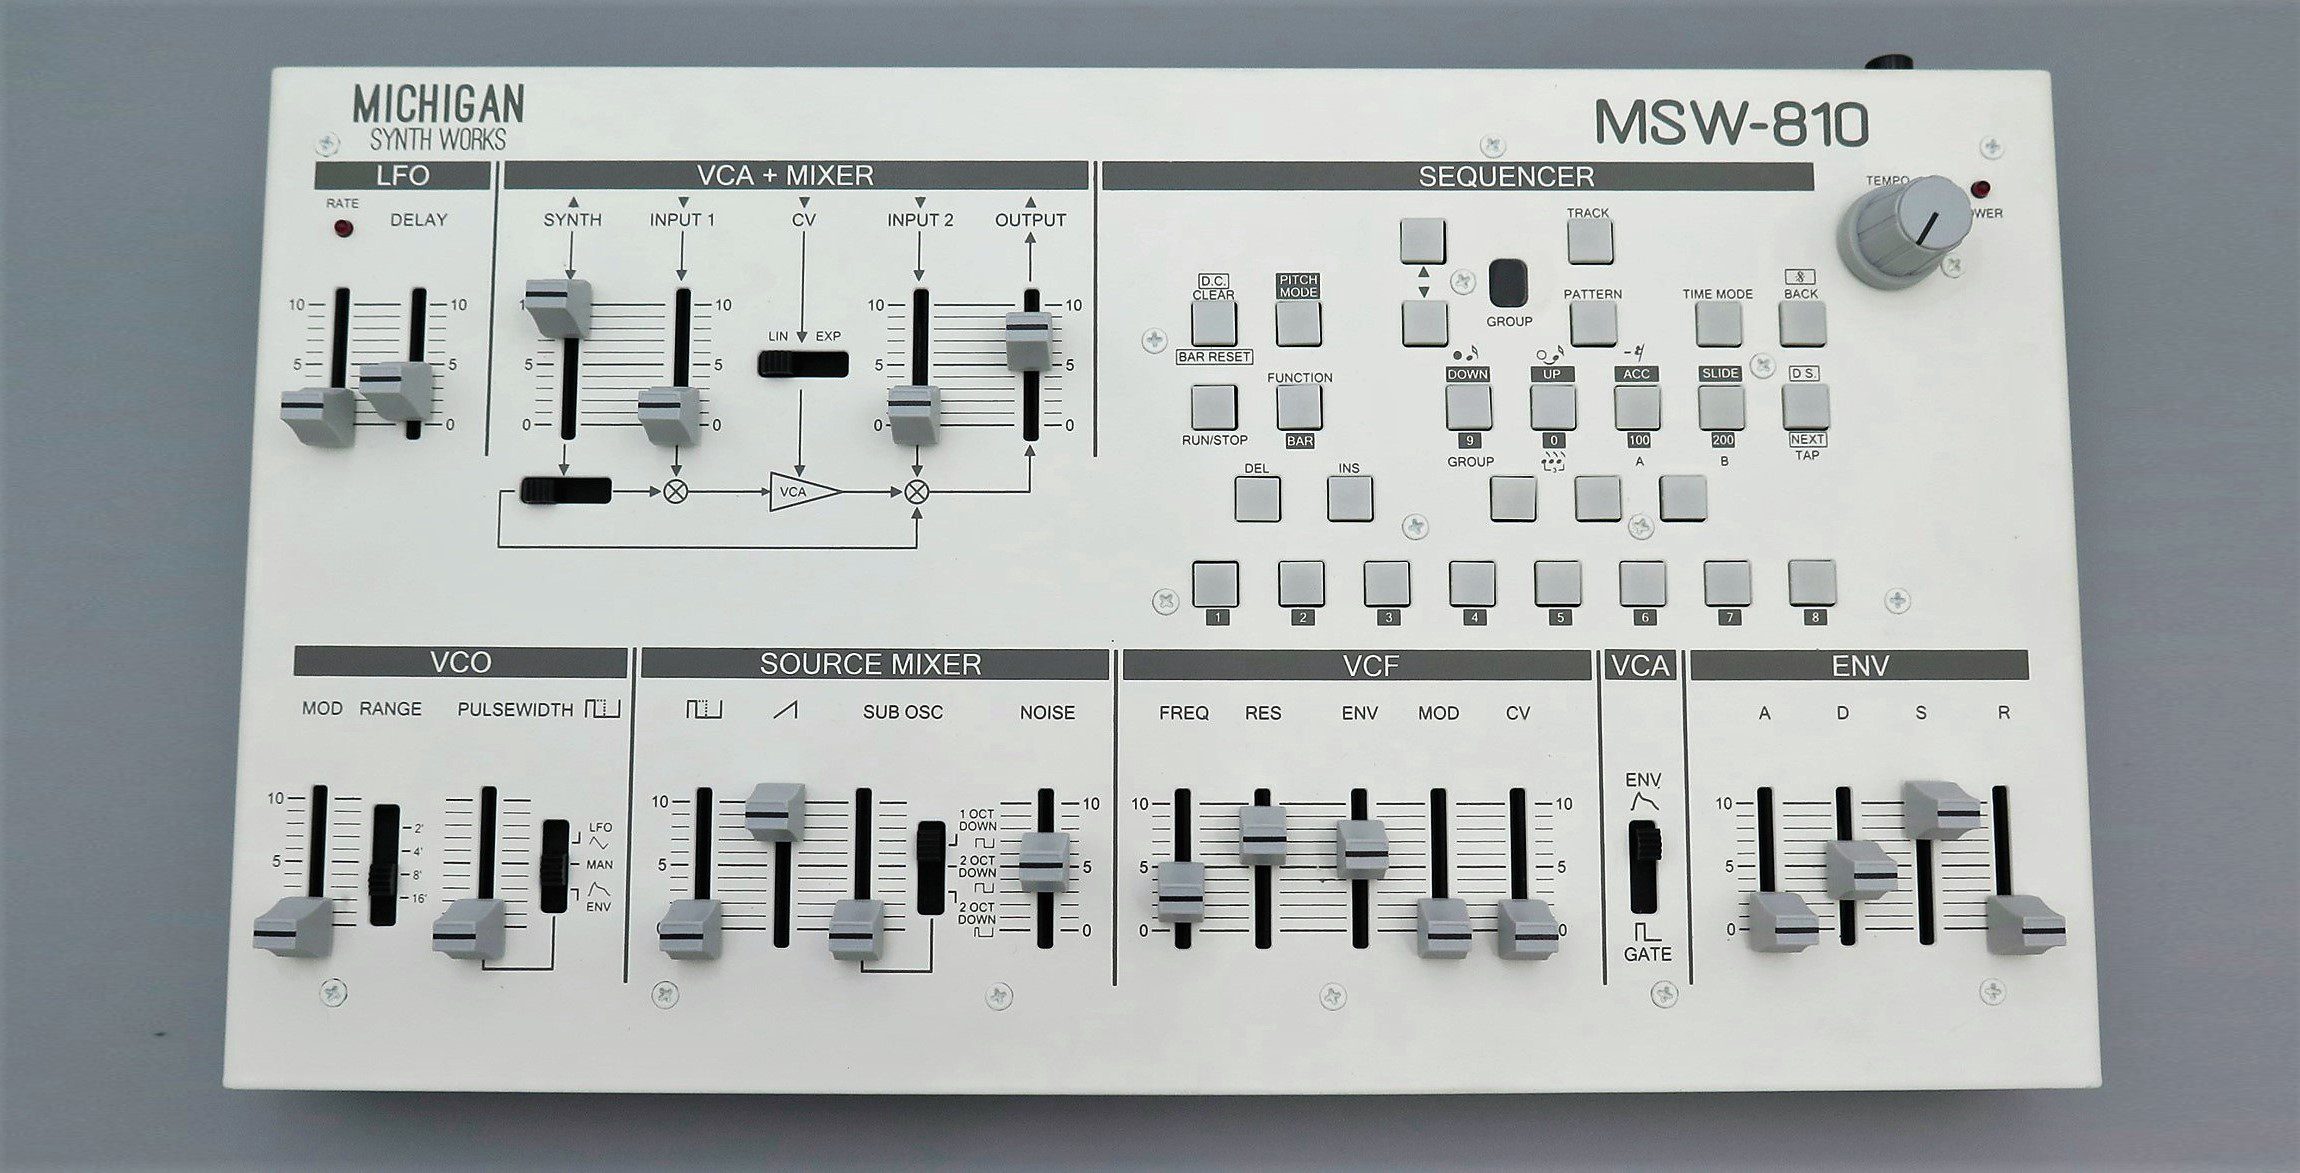 MSW-810 with sequencer!